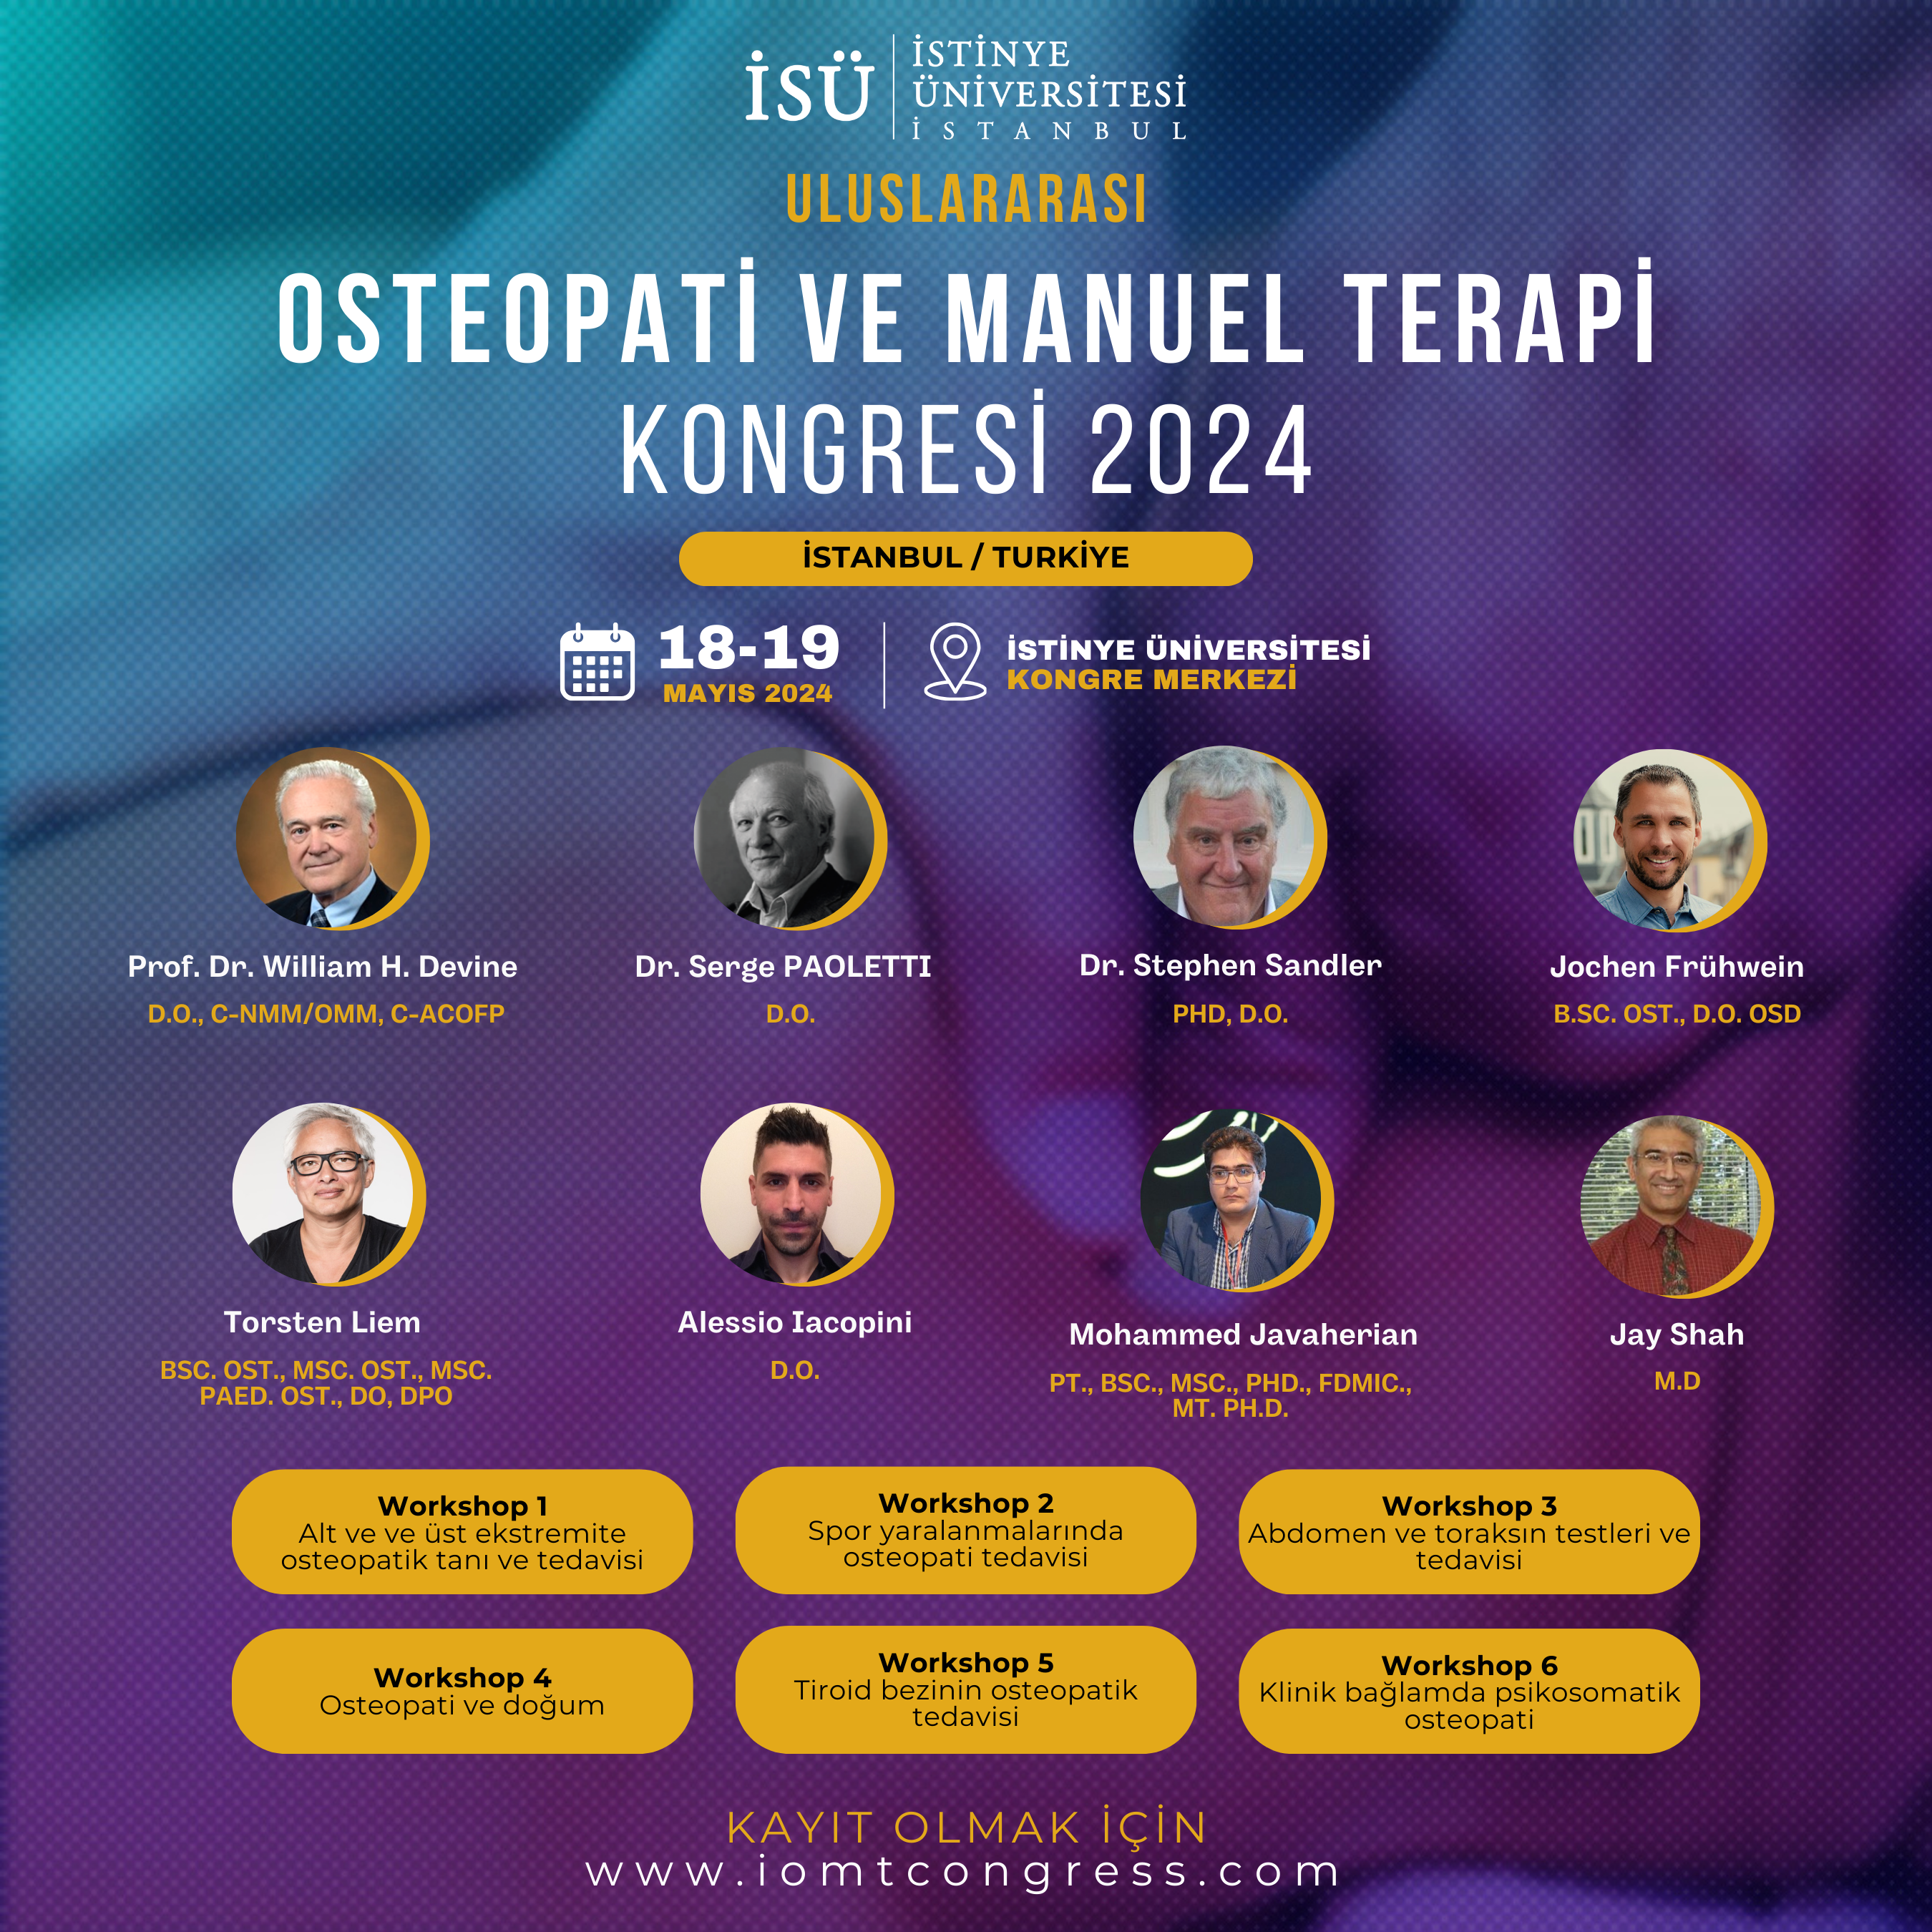 International Osteopathy and Manual Therapy Congress 2024